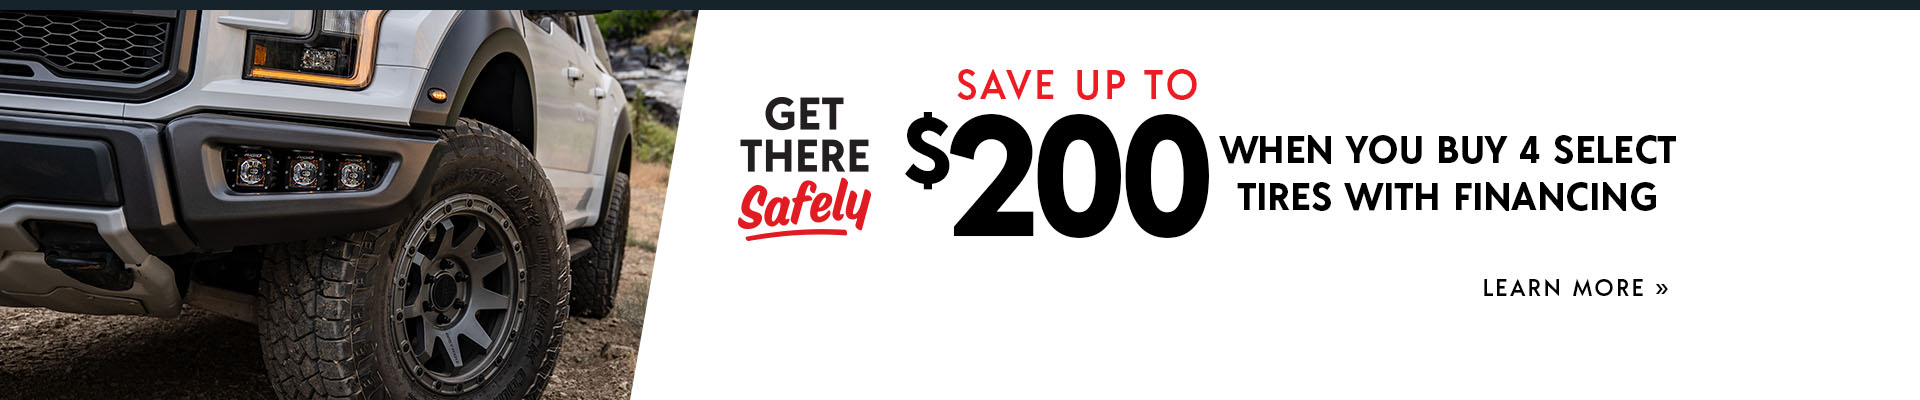 Save up to $200 with Les Schwab Financing Banner.